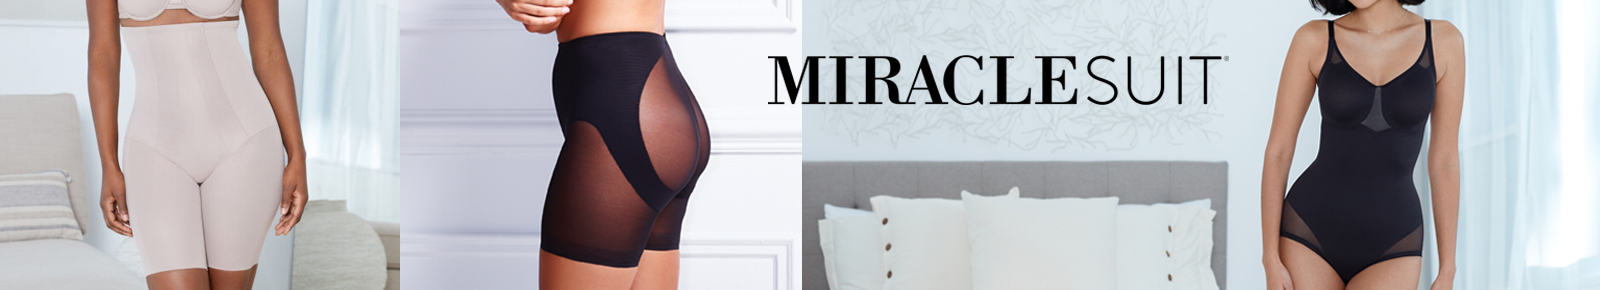 Miraclesuit Shapewear Flexible Fit Waistline Shaping Pantliner in